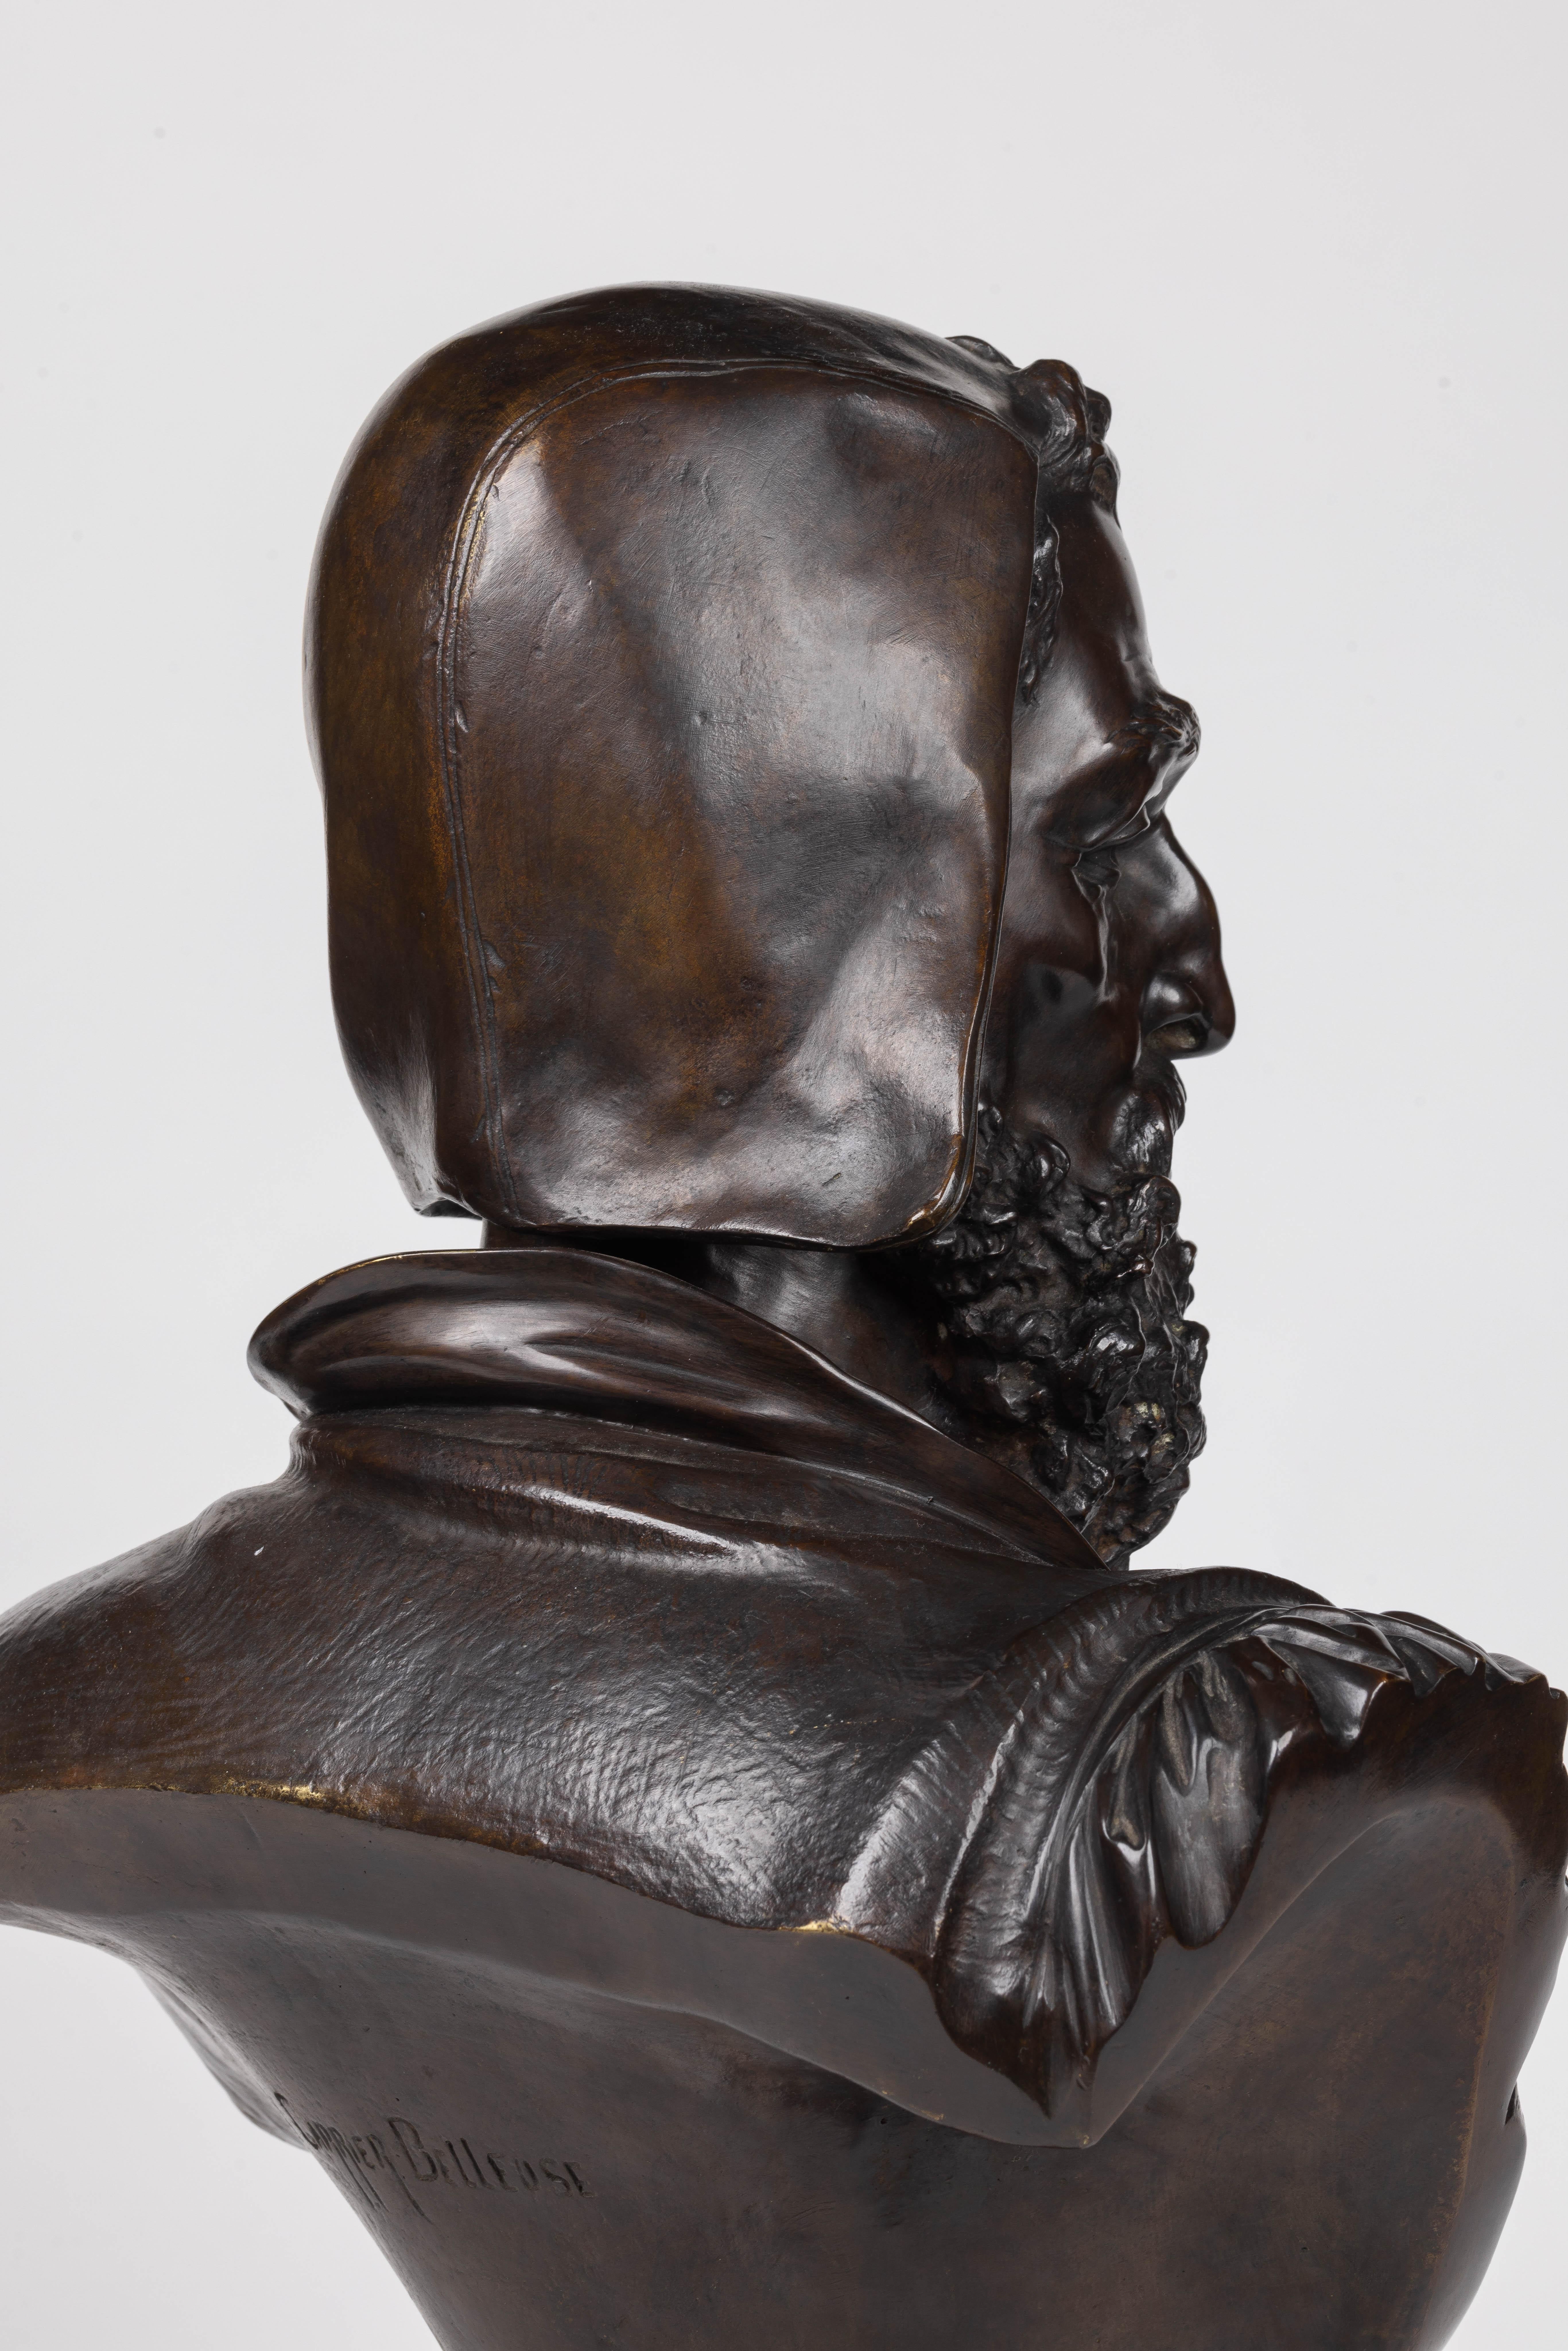 Albert-Ernest Carrier-Belleuse, A Rare and Important Bronze Bust of Michelangelo For Sale 5